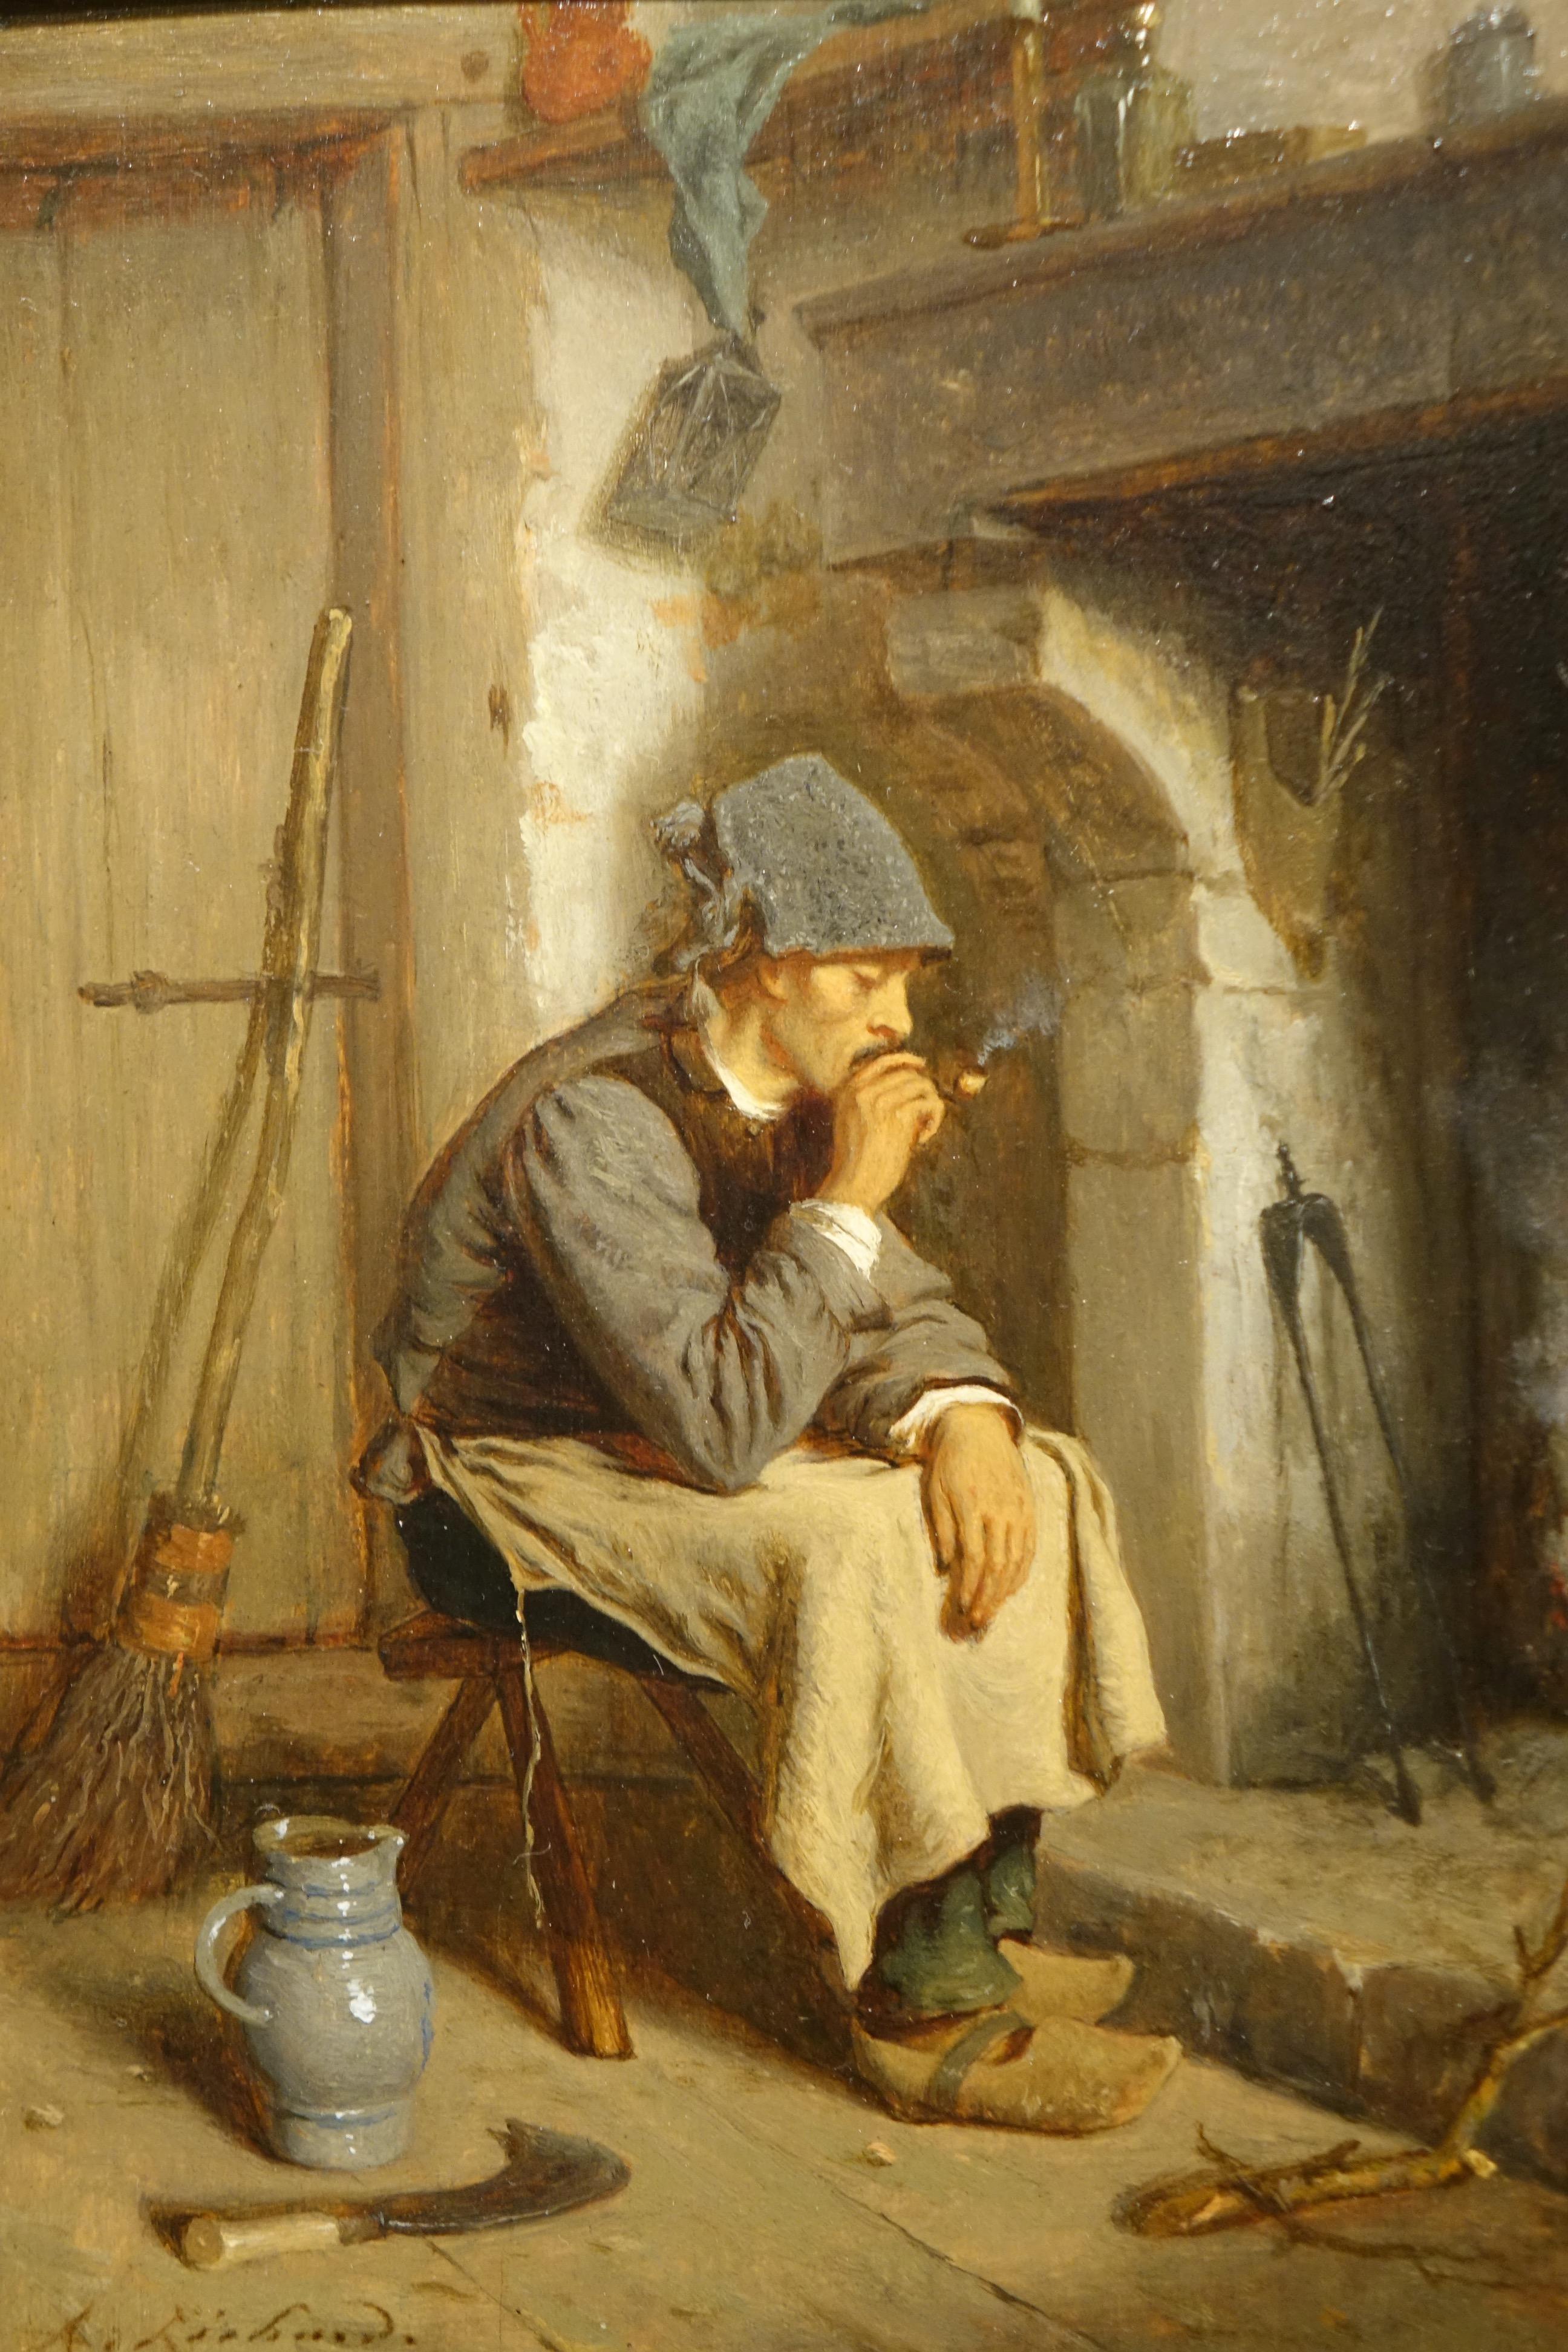 Man resting, sitting, smoking his pipe in front of the fireplace